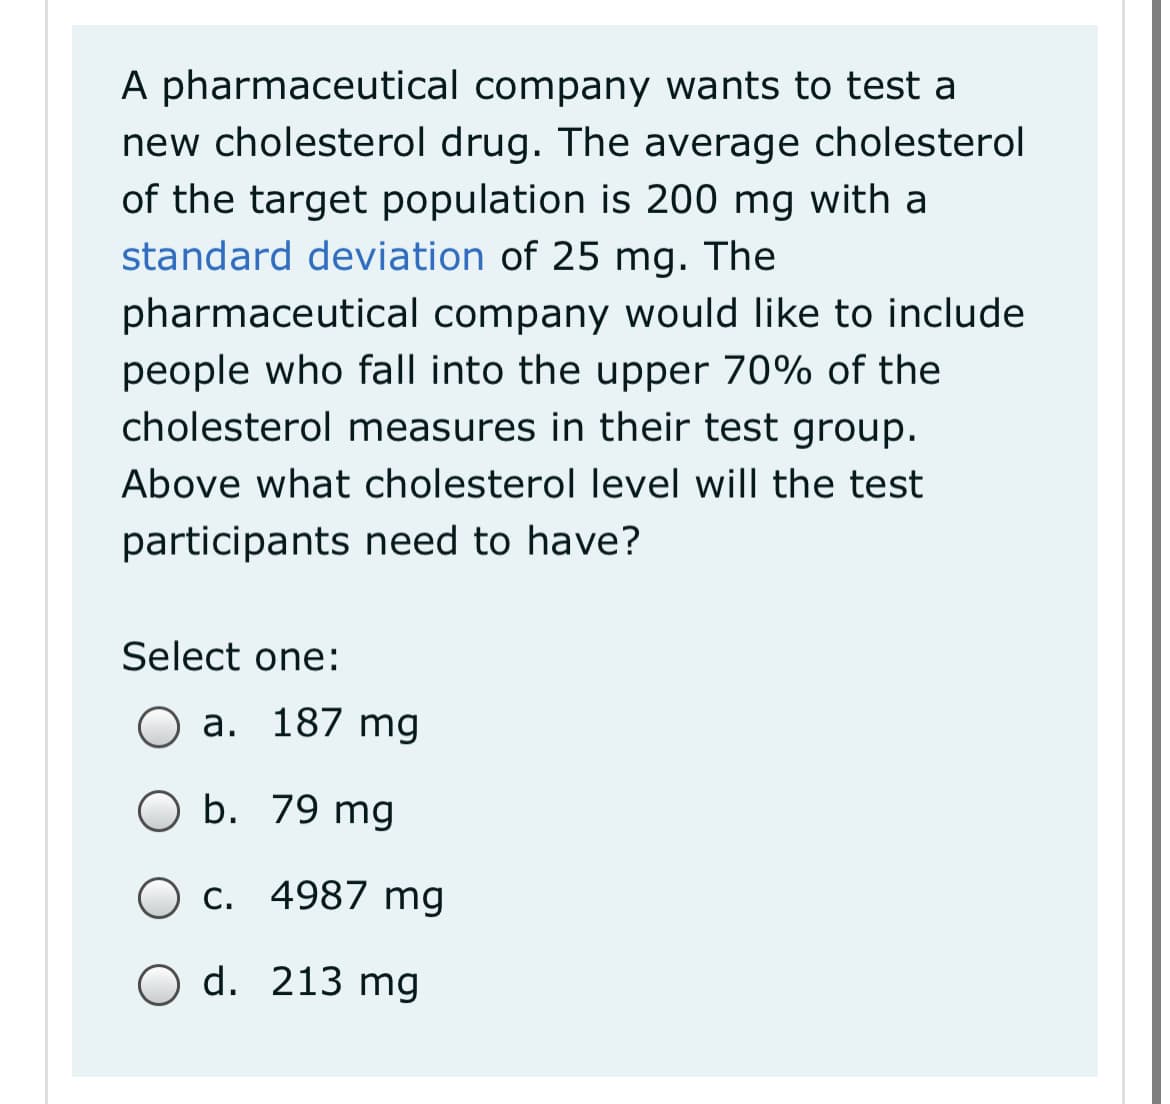 A pharmaceutical company wants to test a
new cholesterol drug. The average cholesterol
of the target population is 200 mg with a
standard deviation of 25 mg. The
pharmaceutical company would like to include
people who fall into the upper 70% of the
cholesterol measures in their test group.
Above what cholesterol level will the test
participants need to have?
Select one:
a. 187 mg
O b. 79 mg
C. 4987 mg
O d. 213 mg
